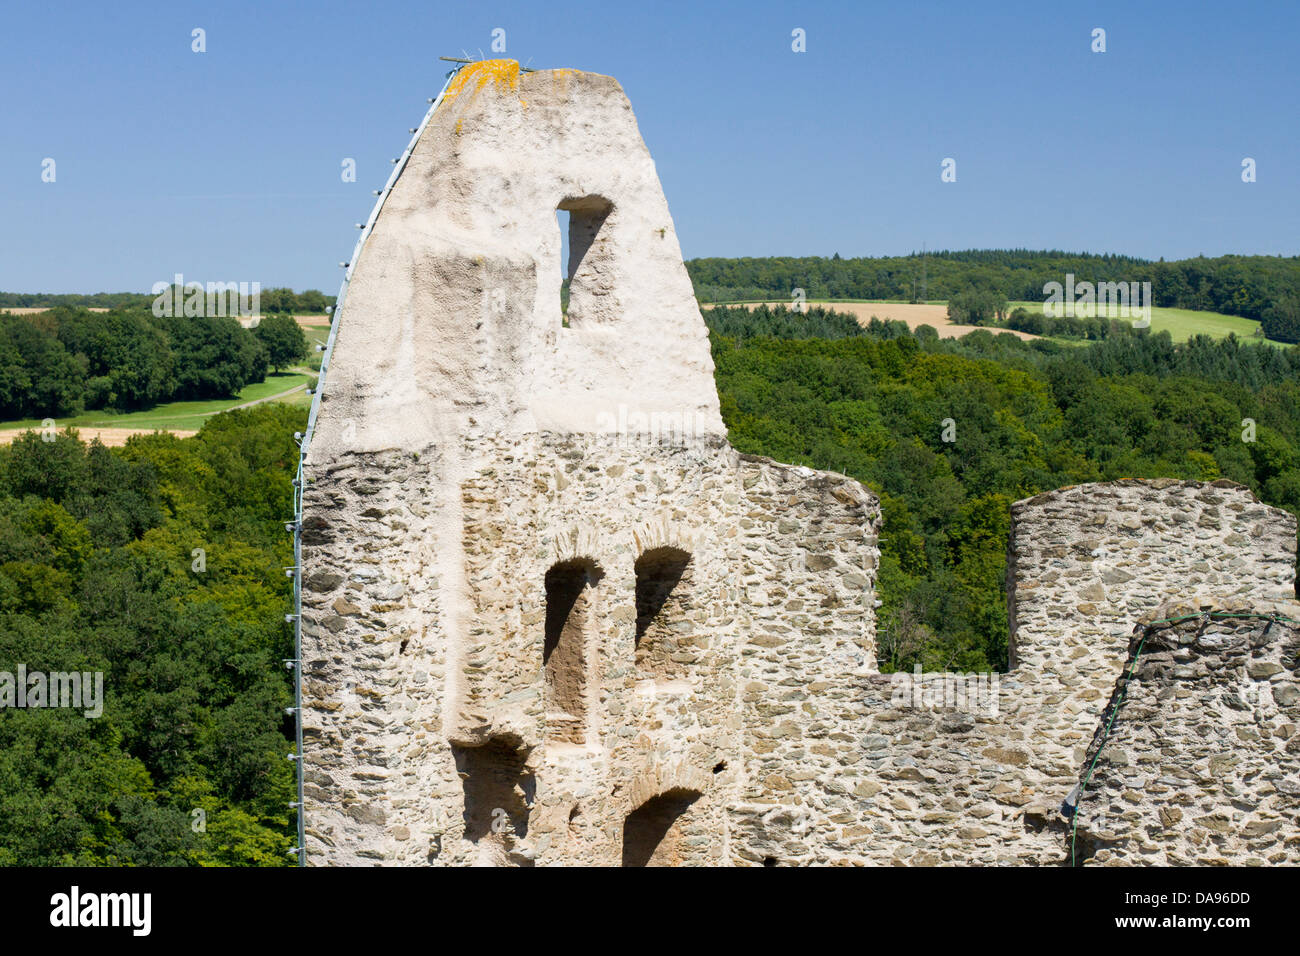 Germany, Hessen, castle ruins, open air cliff, Weinbach-Freienfels cliff, castle, wall, masonry, military wall, building, ruins, Stock Photo